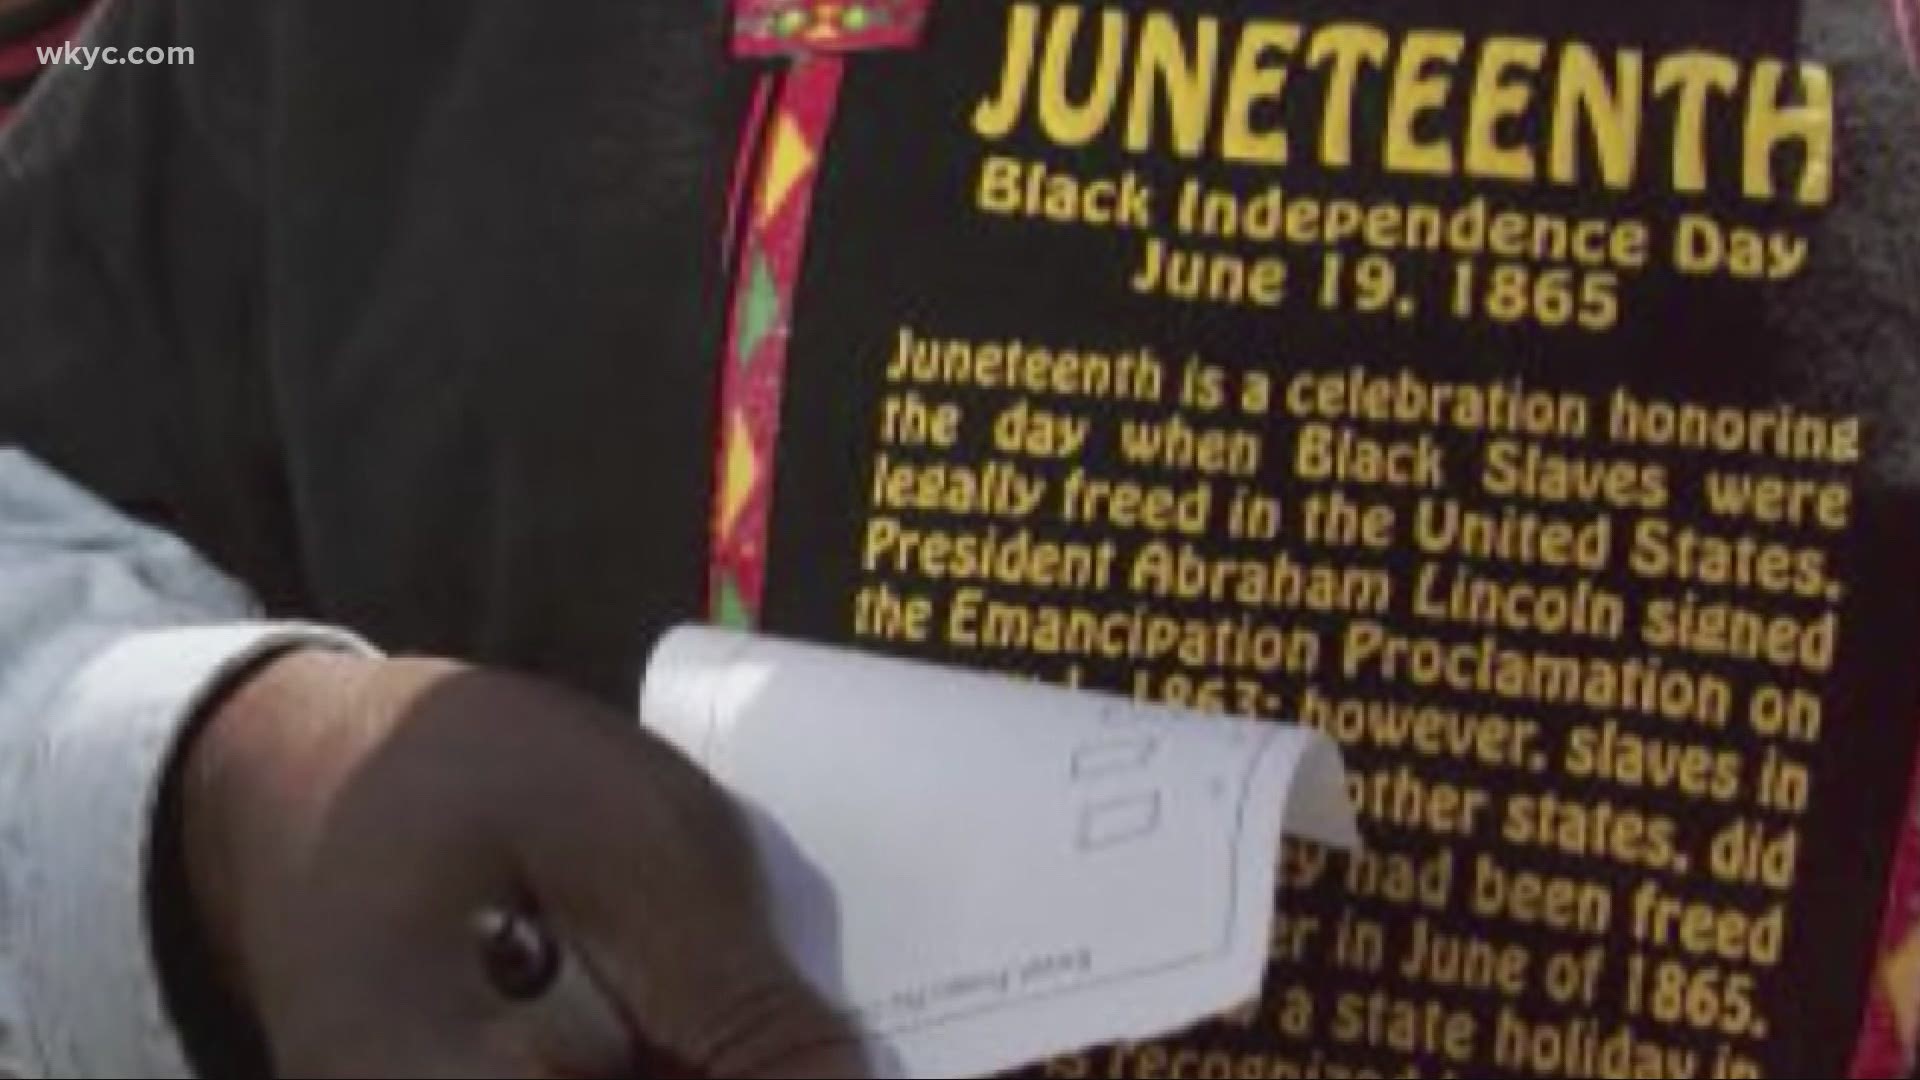 Now a federal holiday, Juneteenth is a celebration of the emancipation of slaves in the U.S. back in 1865. Cleveland is pulling out all the stops.